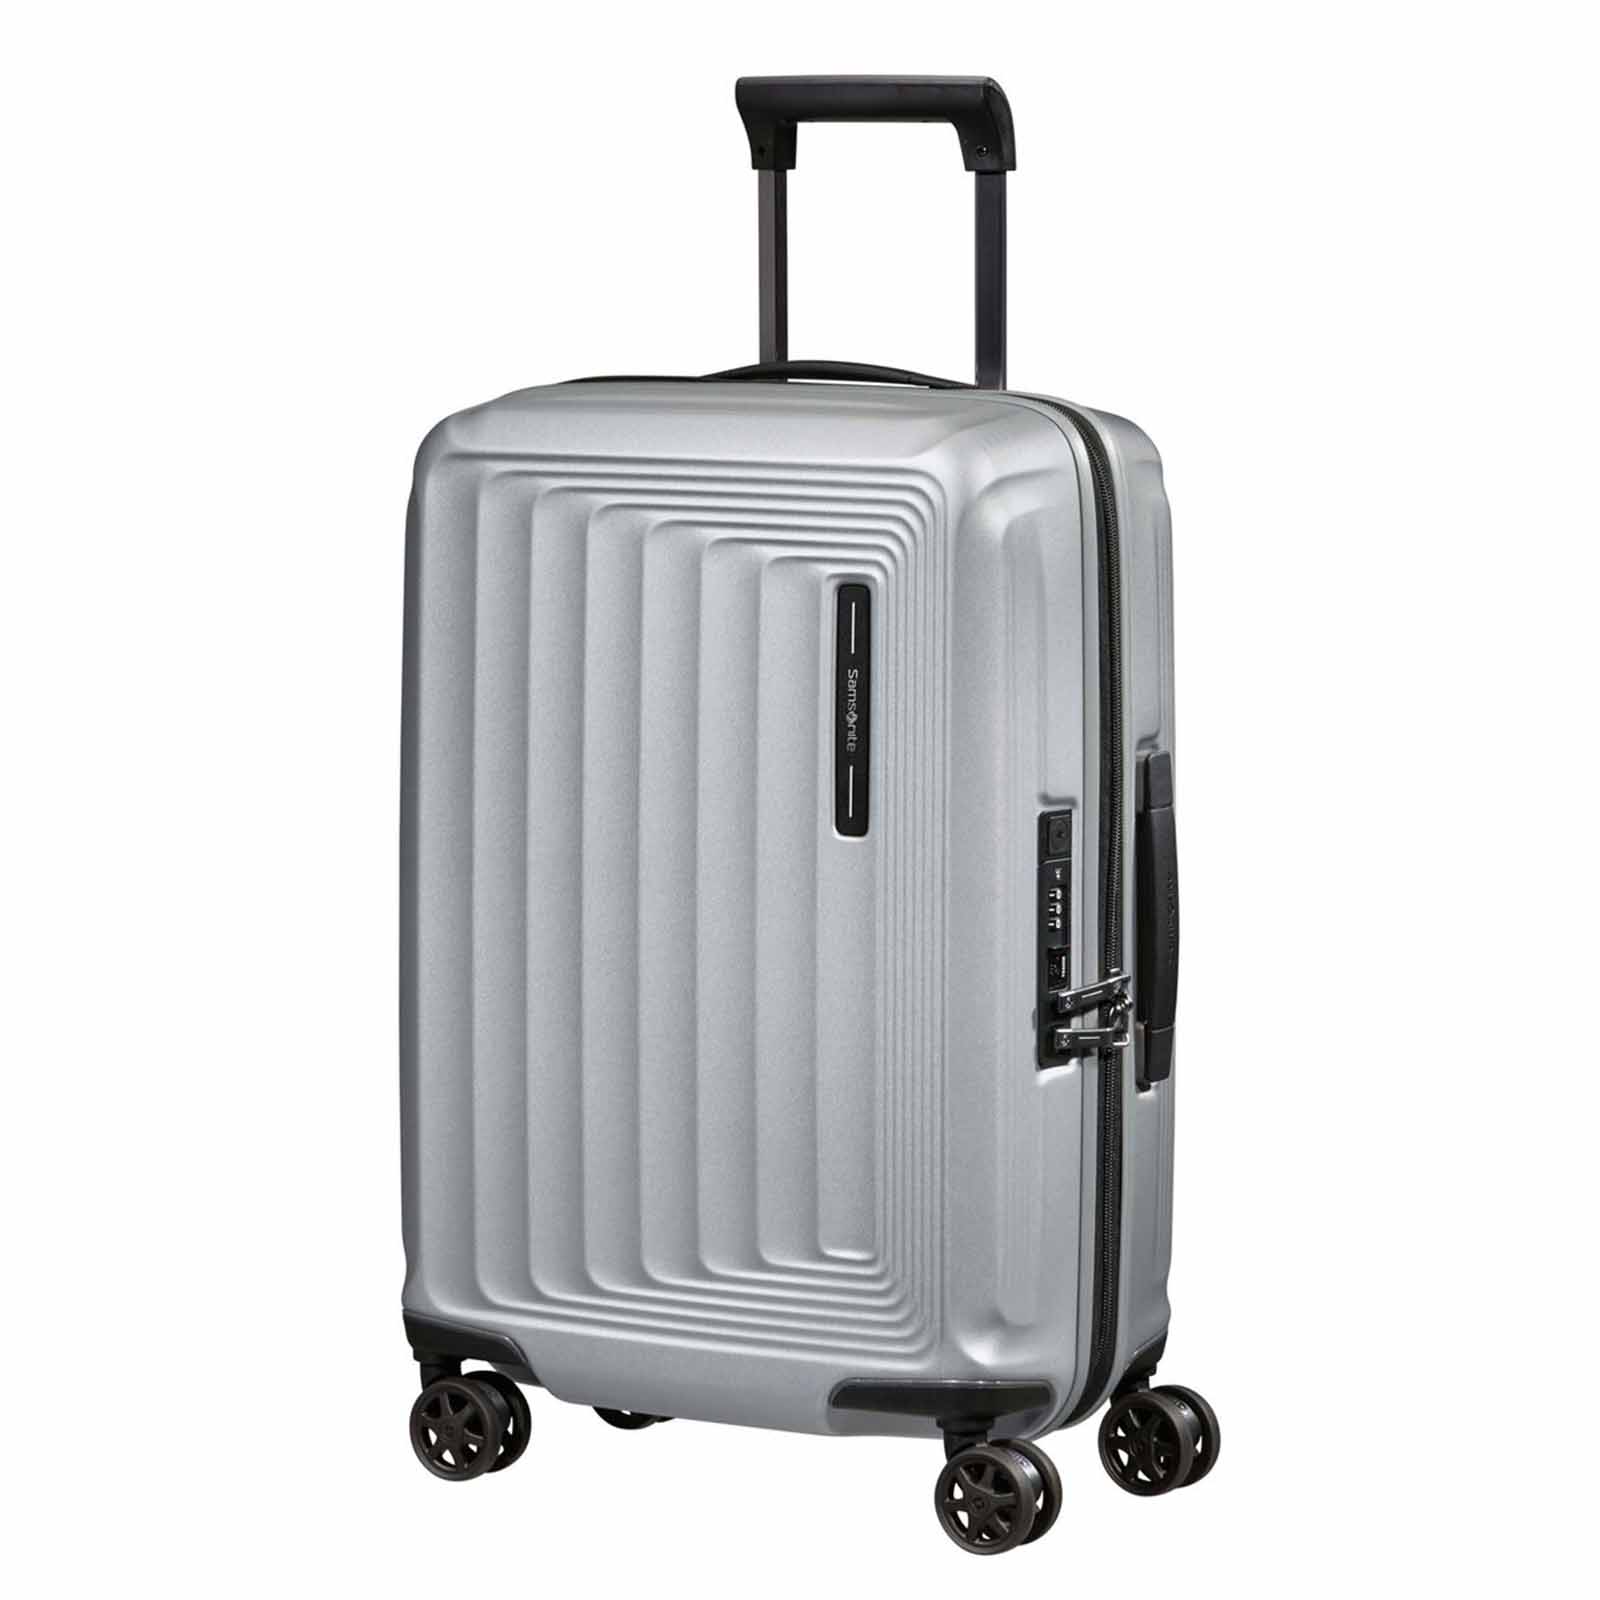 Samsonite-Nuon-55cm-Carry-On-Suitcase-Matt-Silver-Front-Angle